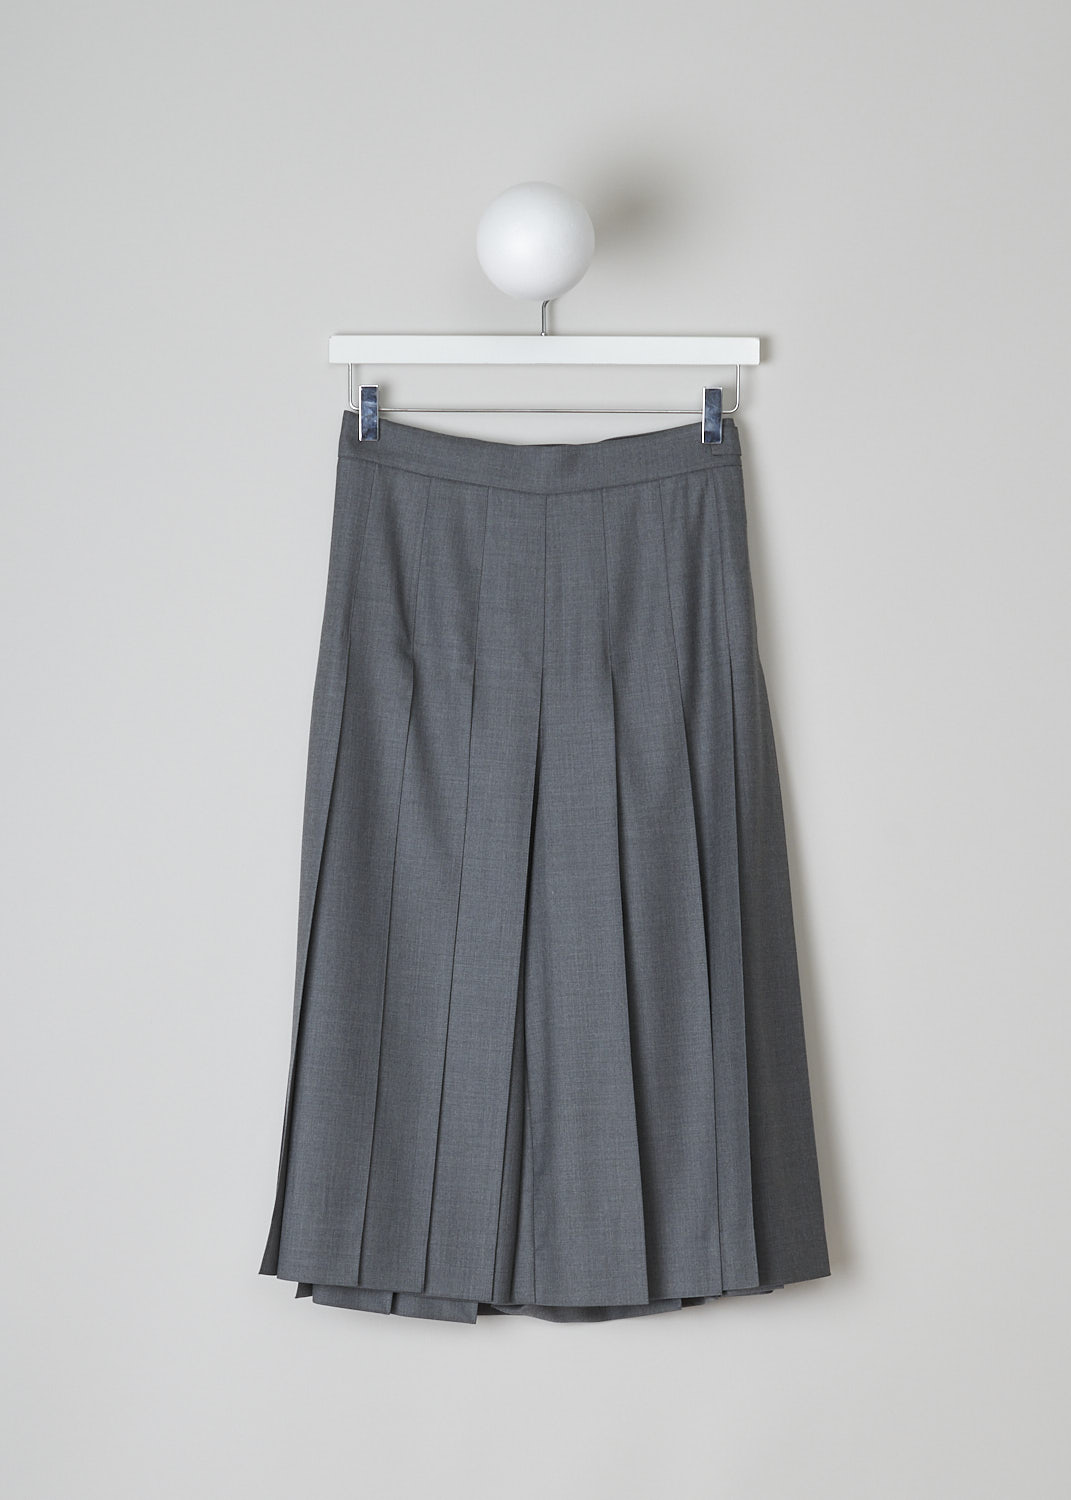 THOM BROWNE, PLEATED CULOTTES IN MID GREY, FTC379A_00626_035, Grey, Front, These mid grey pleated culottes have a concealed zip closure to one side with a button tab on the waistband. These culottes hit below the knee. In the back, the brand's signature tricolored pull-tab can be found.
